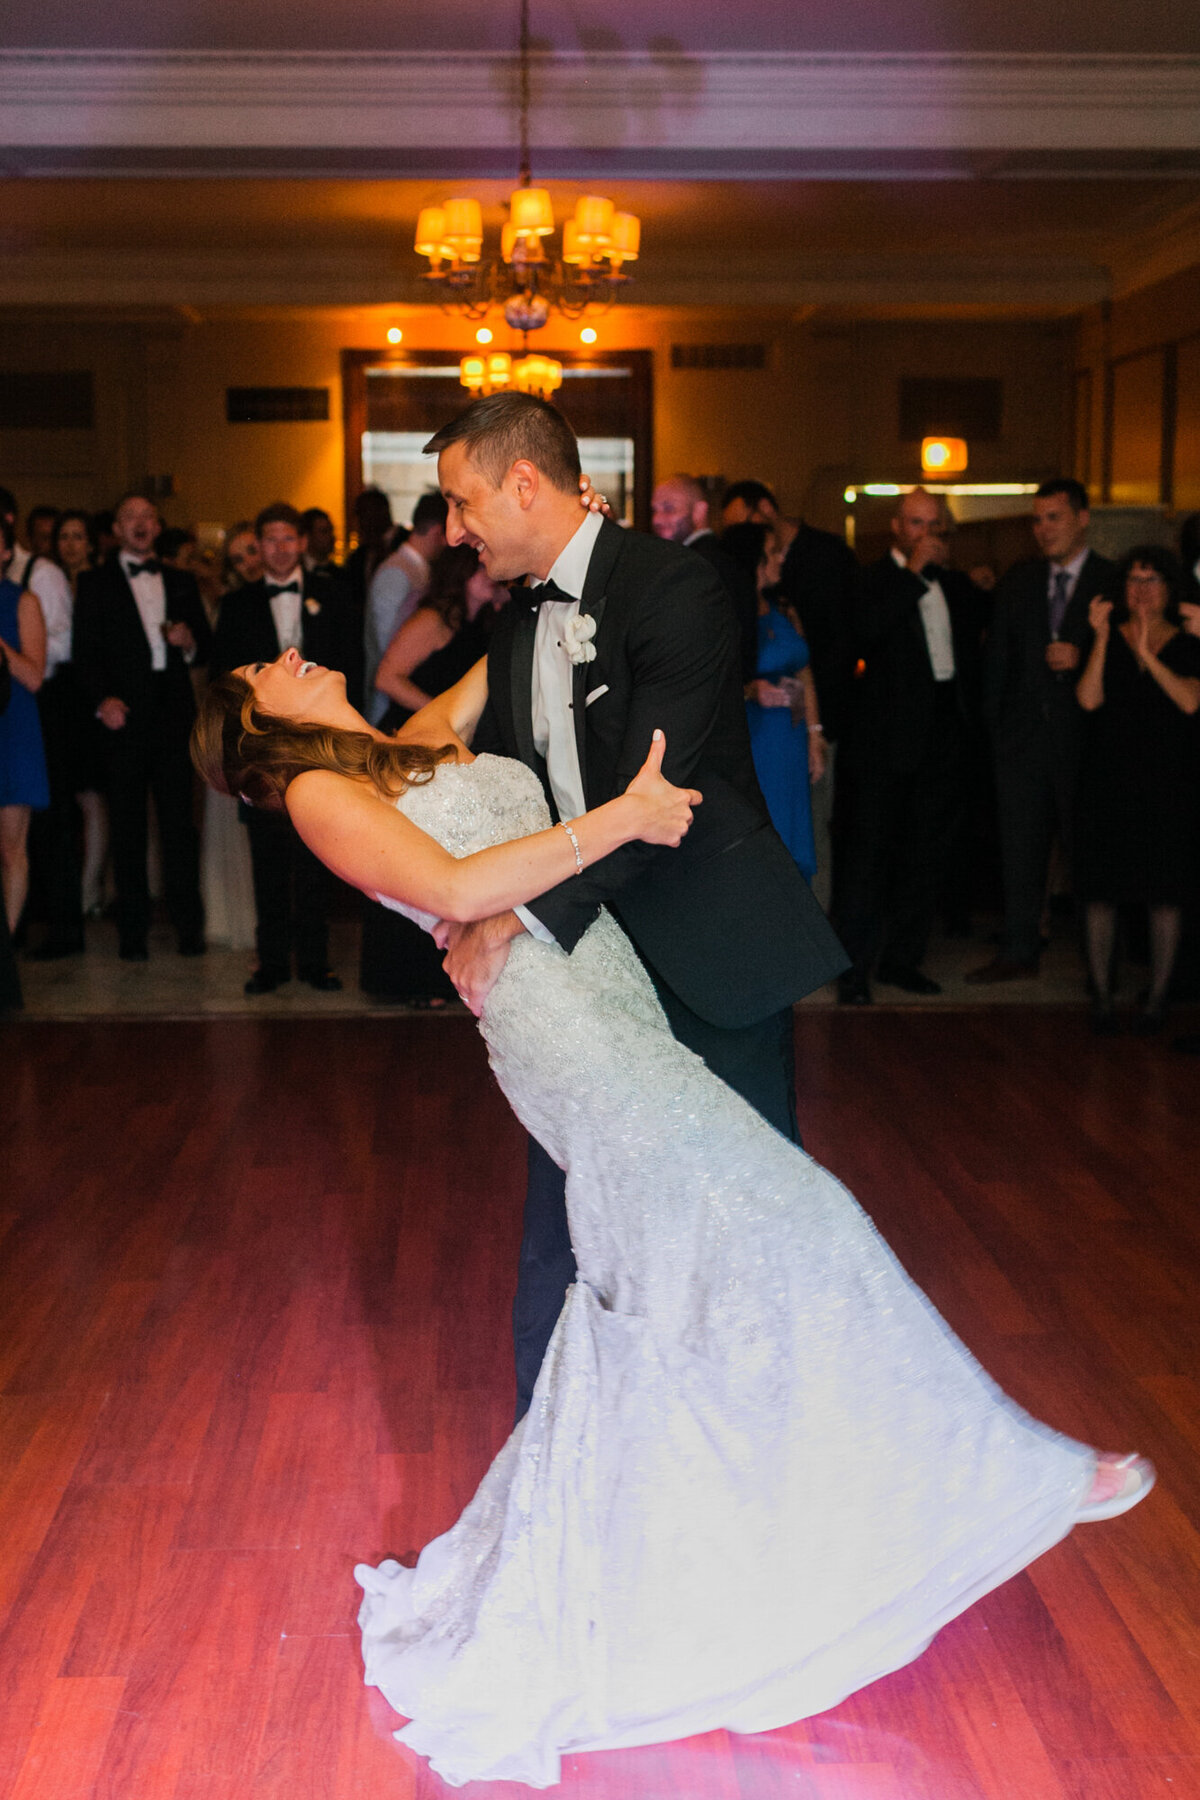 A happy moment during a first dance at a wedding reception in Chicago